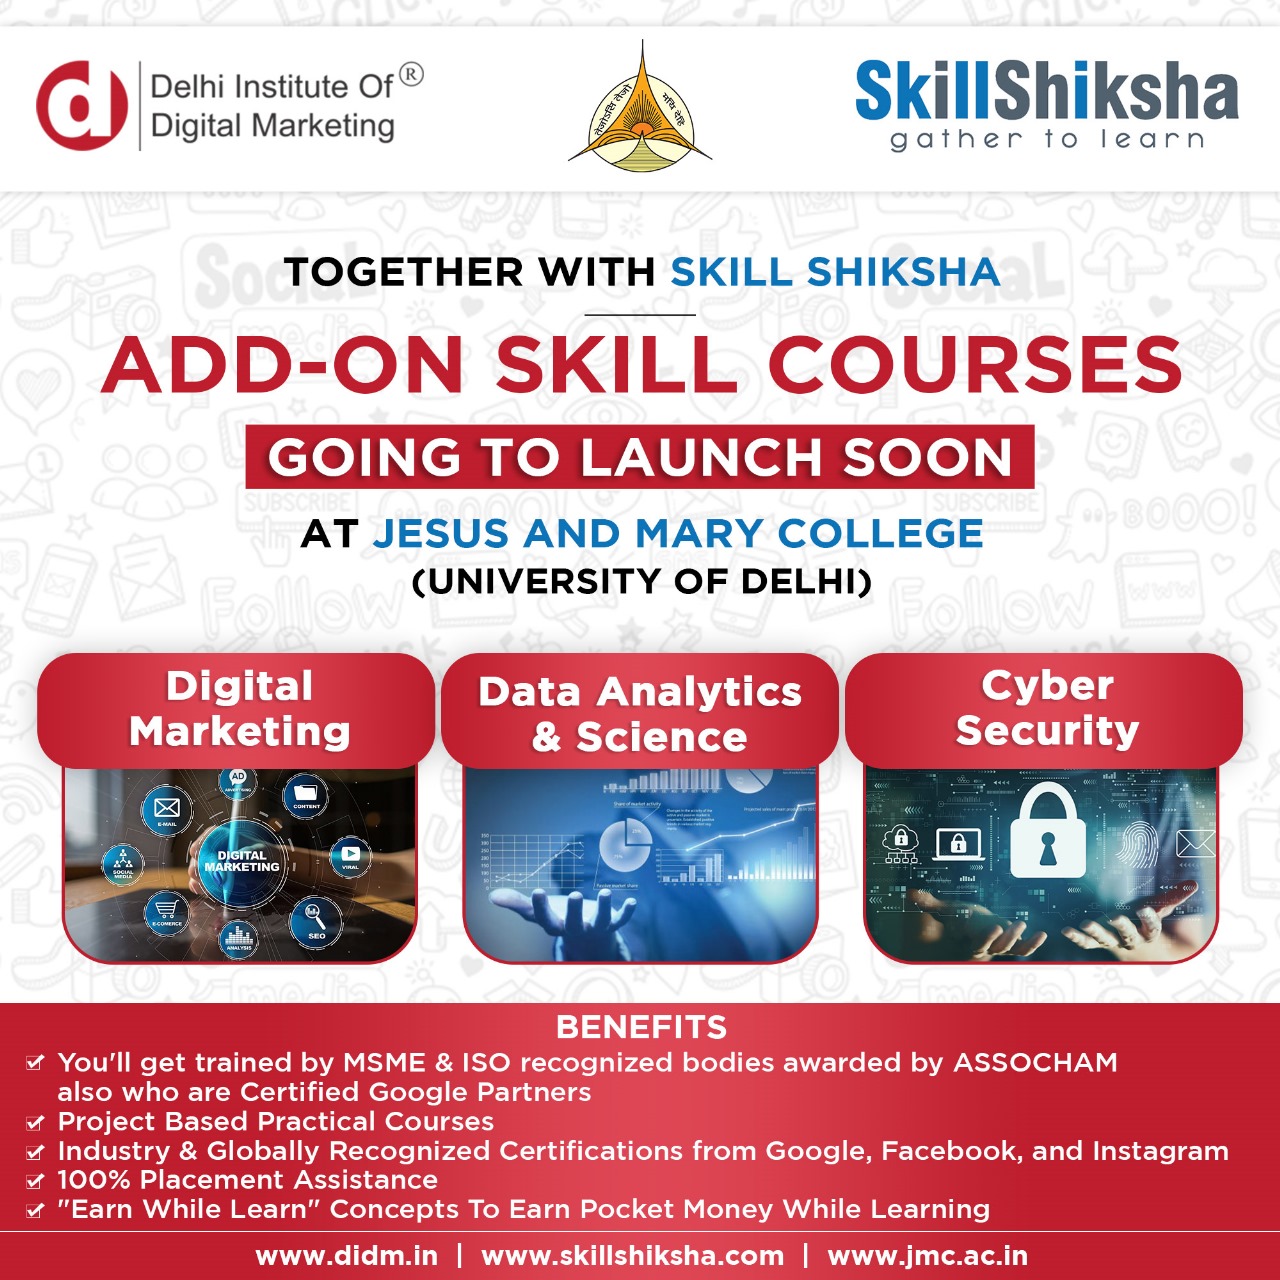 DIDM Will Soon Start To Conduct Classes On ‘Add-on Skill Courses’ At JMC